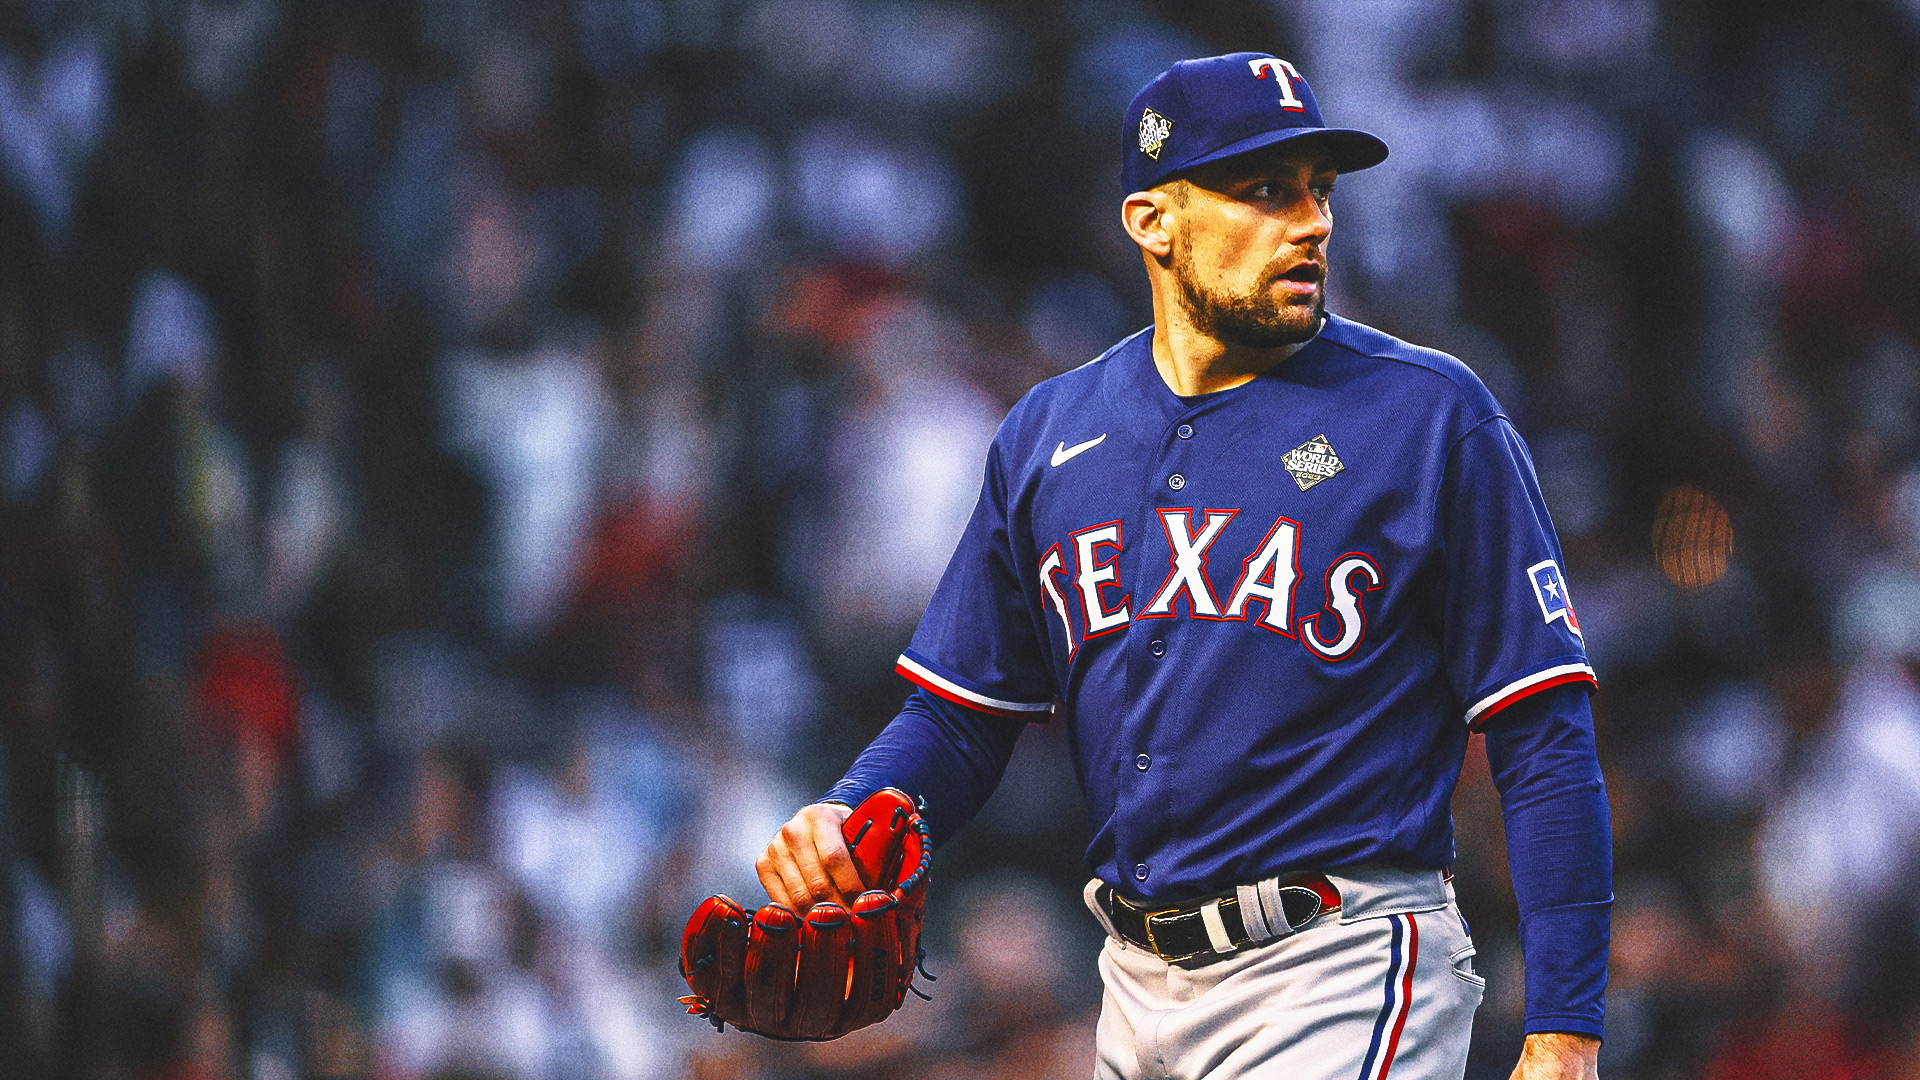 Nathan Eovaldi builds on idol Nolan Ryan's legacy by bringing WS title to Texas